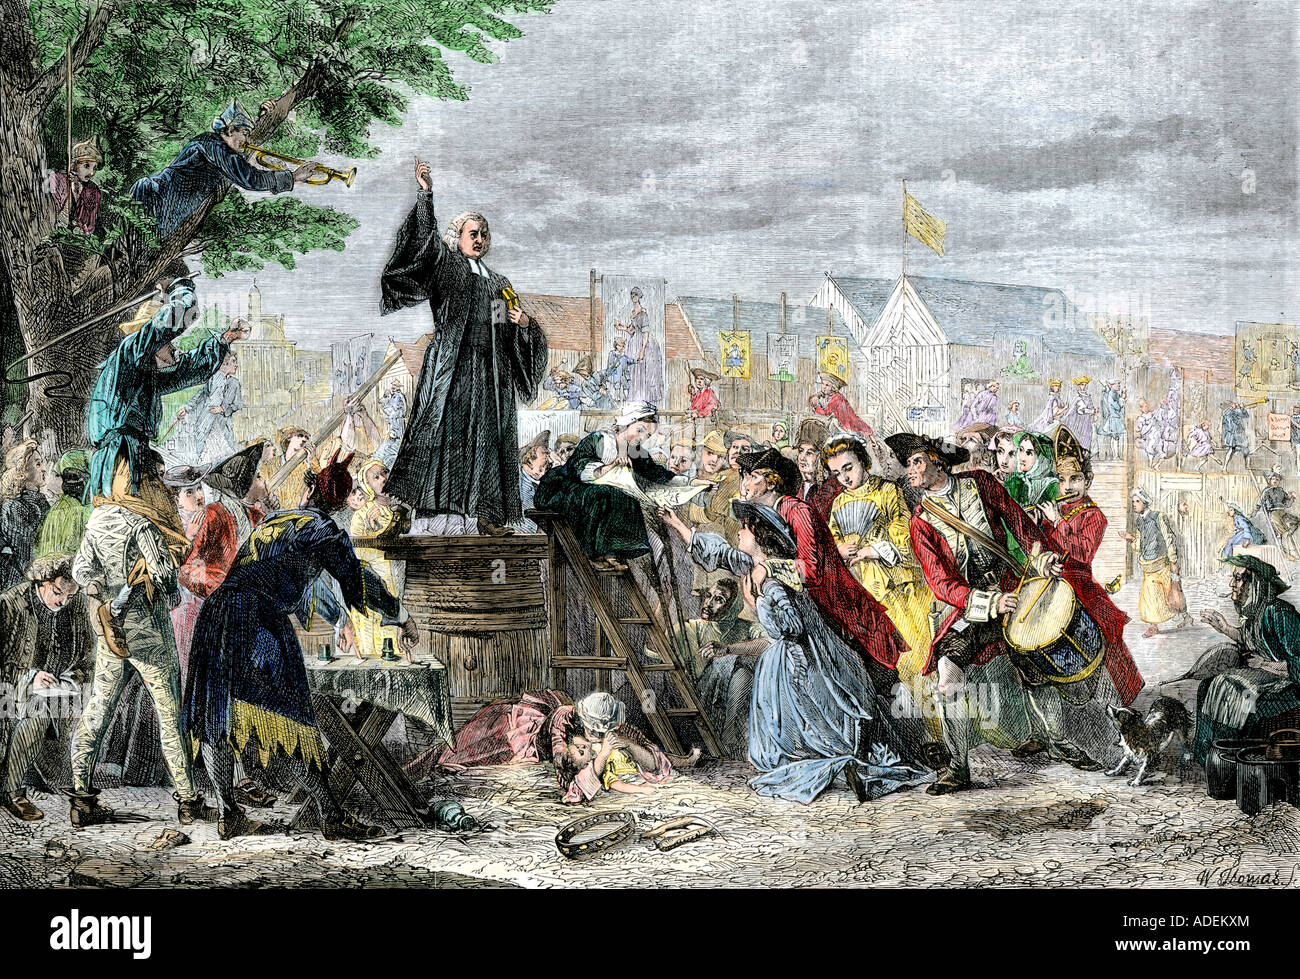 George Whitefield preaching in Moorfields London 1742. Hand-colored woodcut Stock Photo